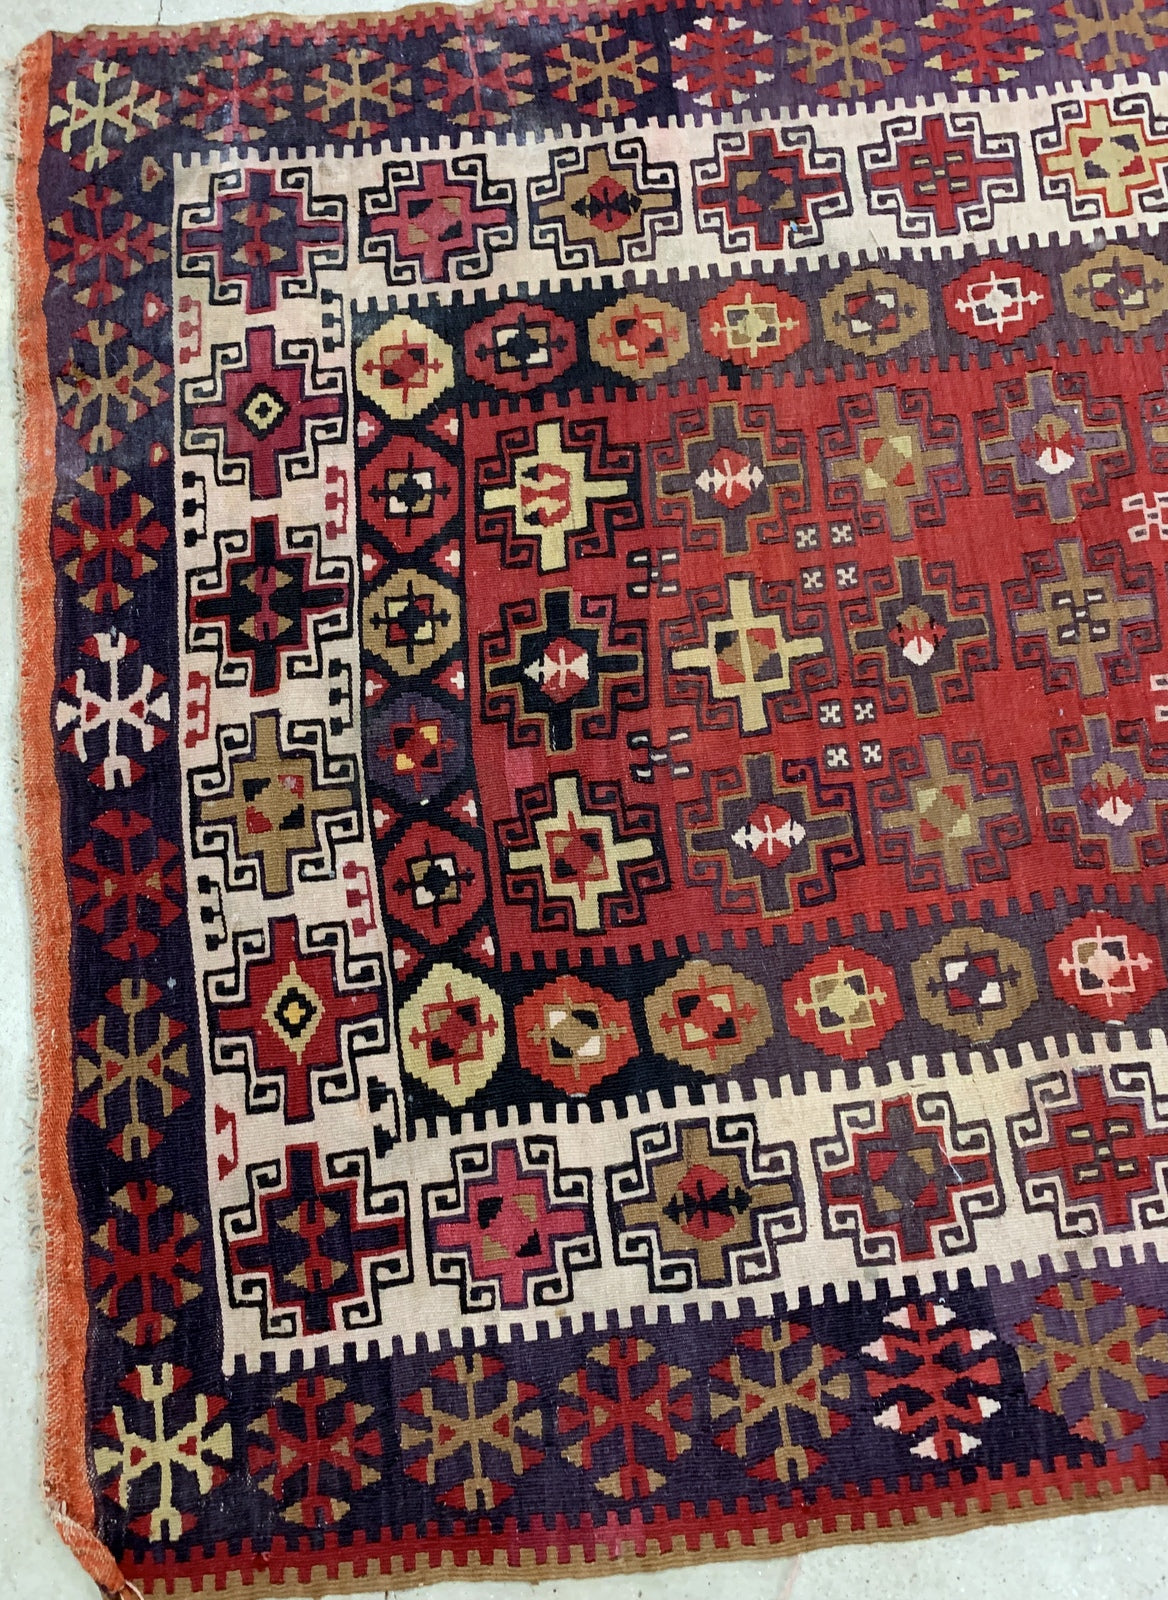 Handmade antique prayer Turkish kilim in bright shades. The rug is from the beginning of 20th century in original good condition.